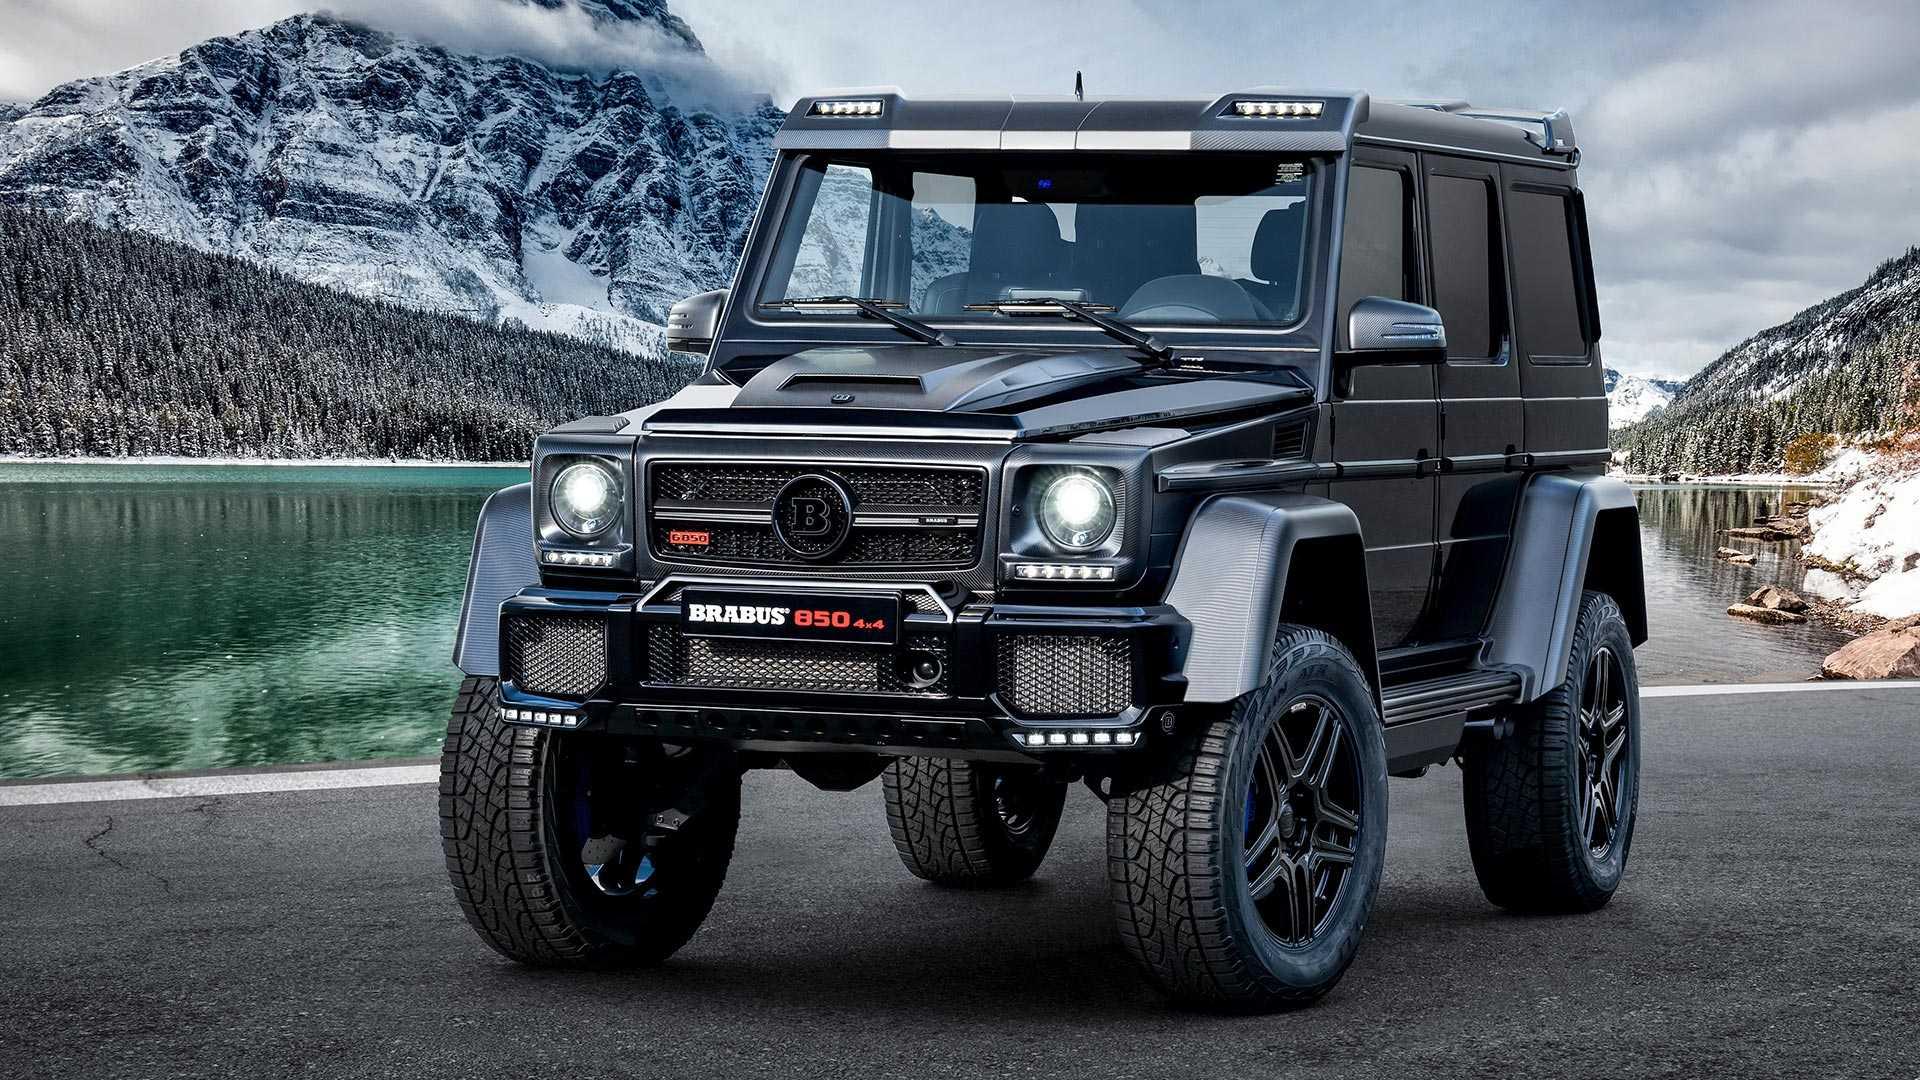 Brabus has equipped this G-Wagen pickup truck with 789 horsepower | Modified Rides